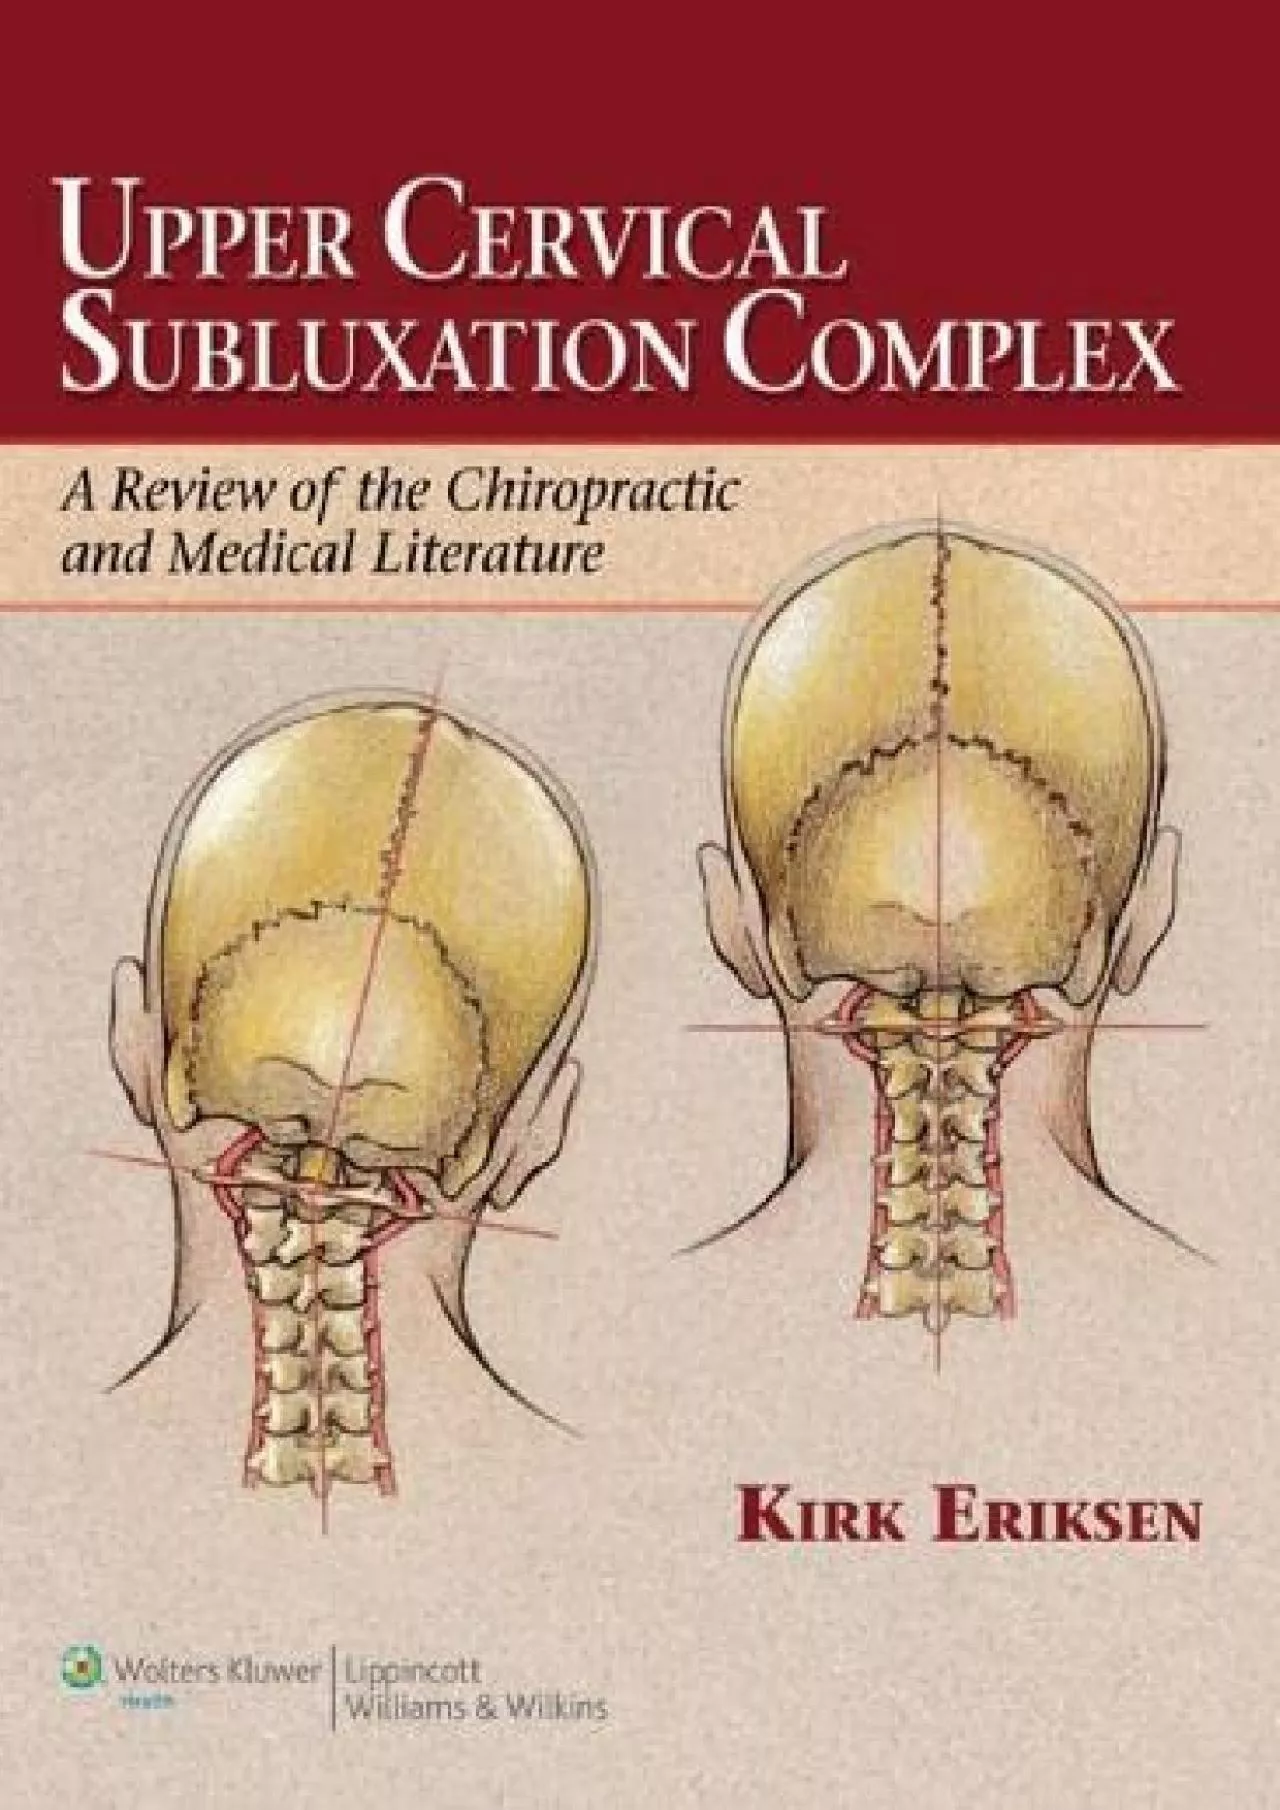 (DOWNLOAD)-Upper Cervical Subluxation Complex: A Review of the Chiropractic and Medical